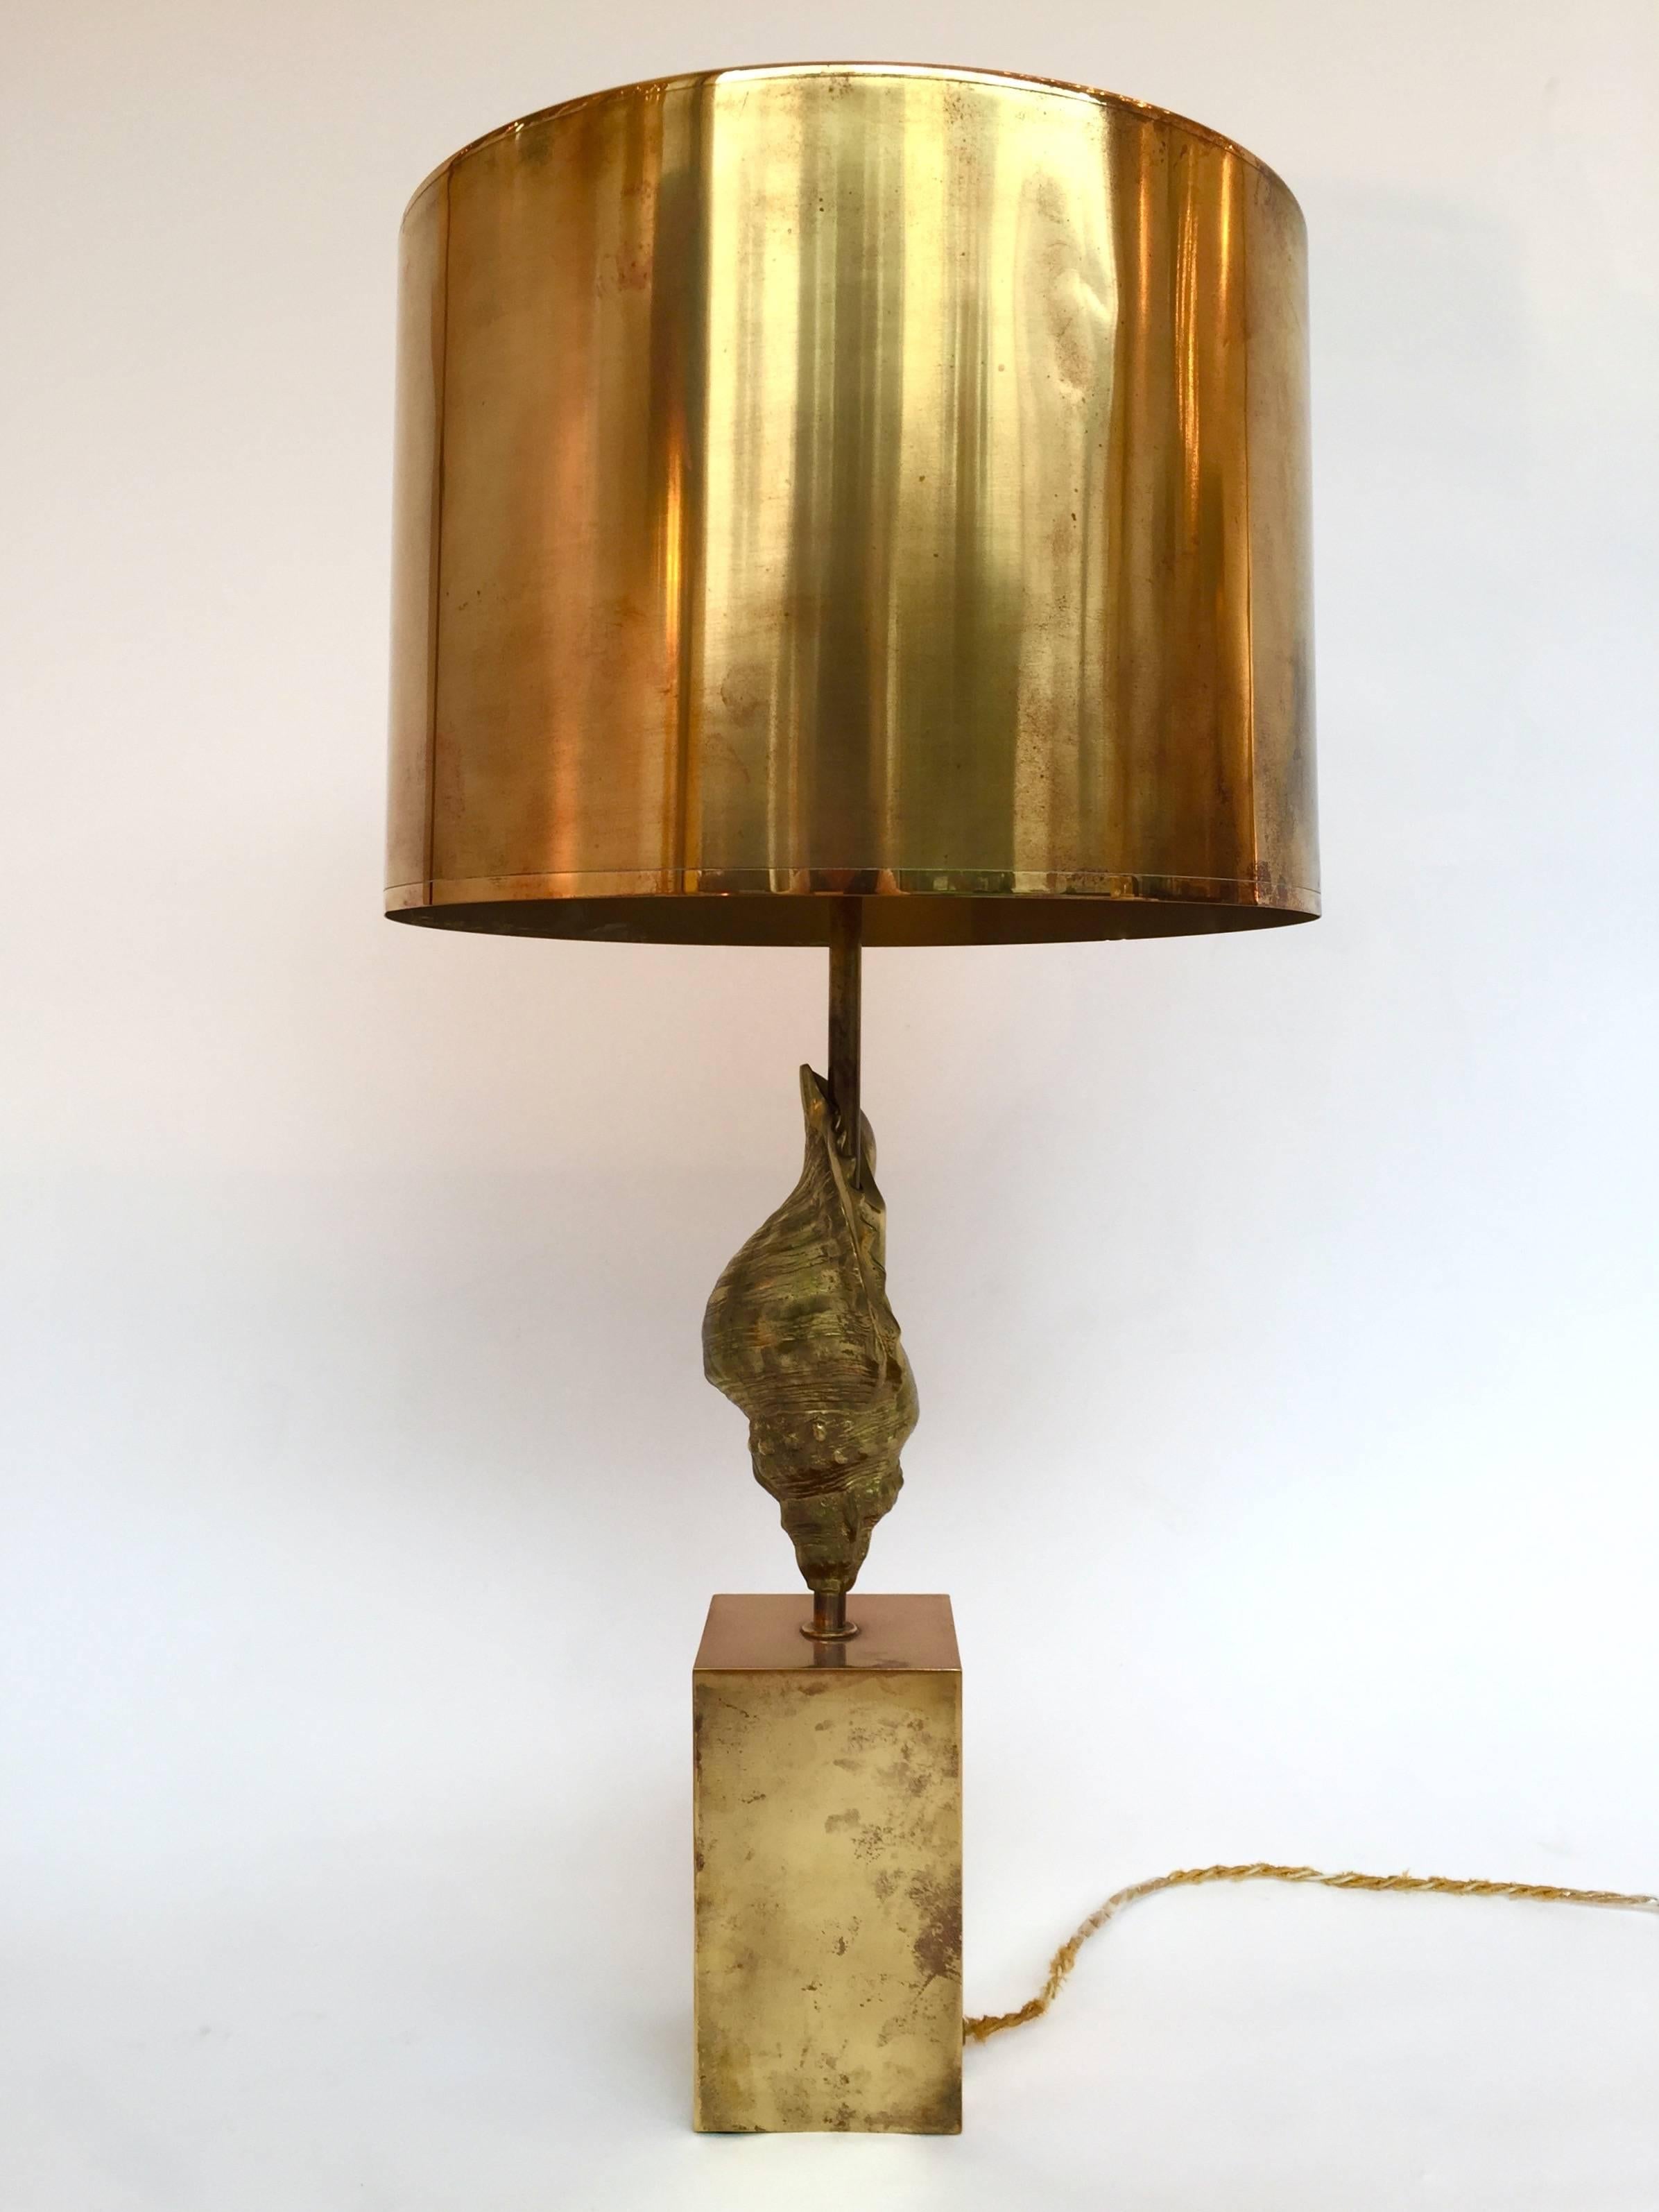 Iconic model of shell lamp by Jacques Charles for Maison Charles. All in gilt bronze with the original lampshade. Beautiful patina. Stamp on the base CHARLES MADE IN FRANCE. One of the best French manufacturer of the 1970s 1980s like Maison Jansen